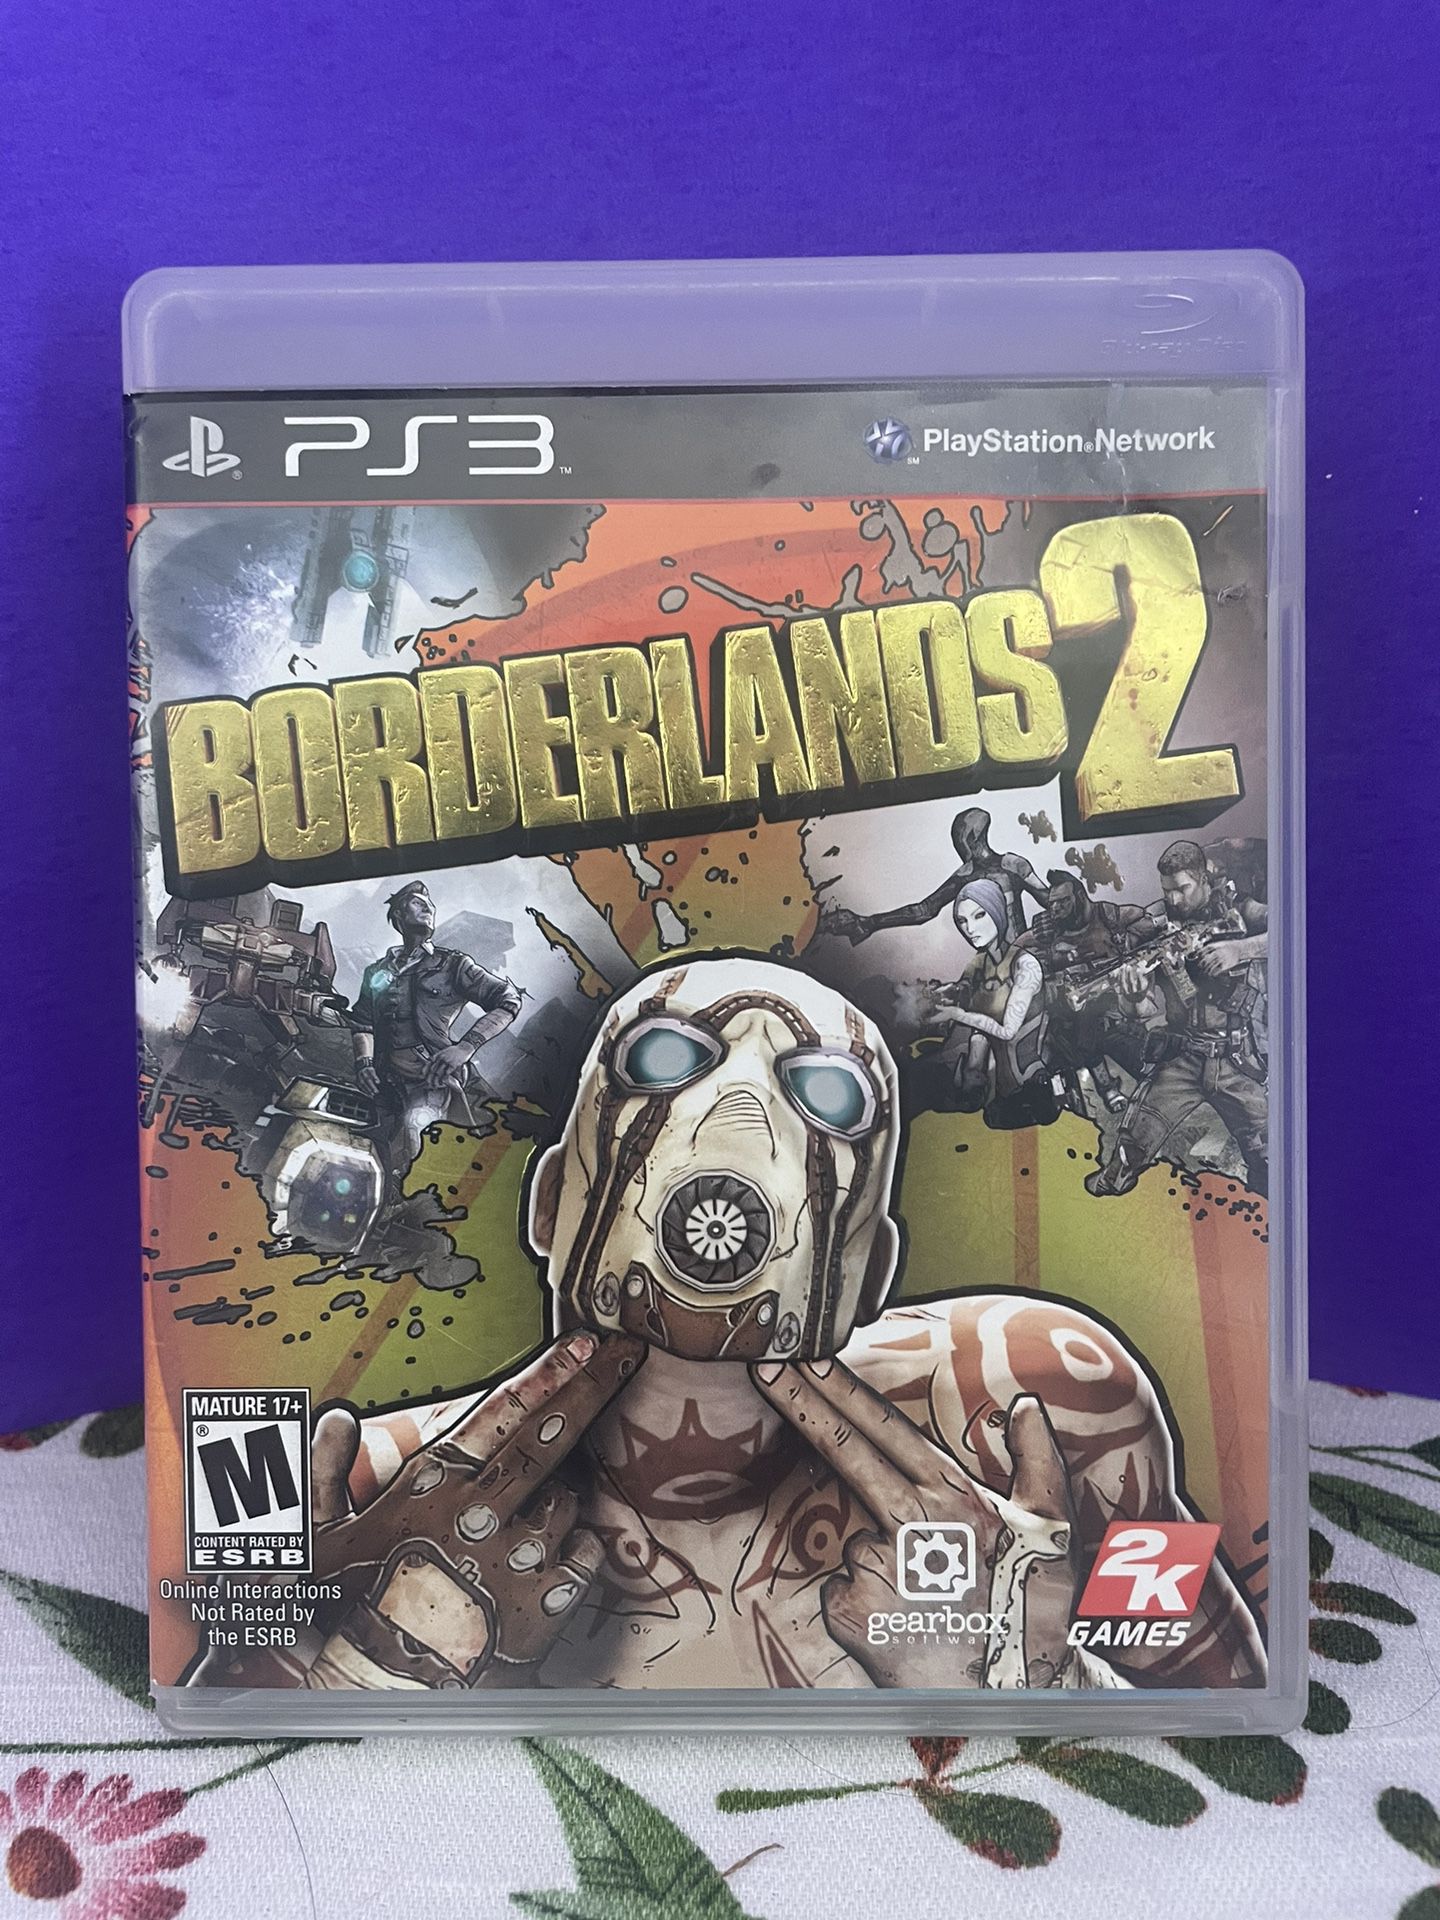 Borderlands 2 for the PS3